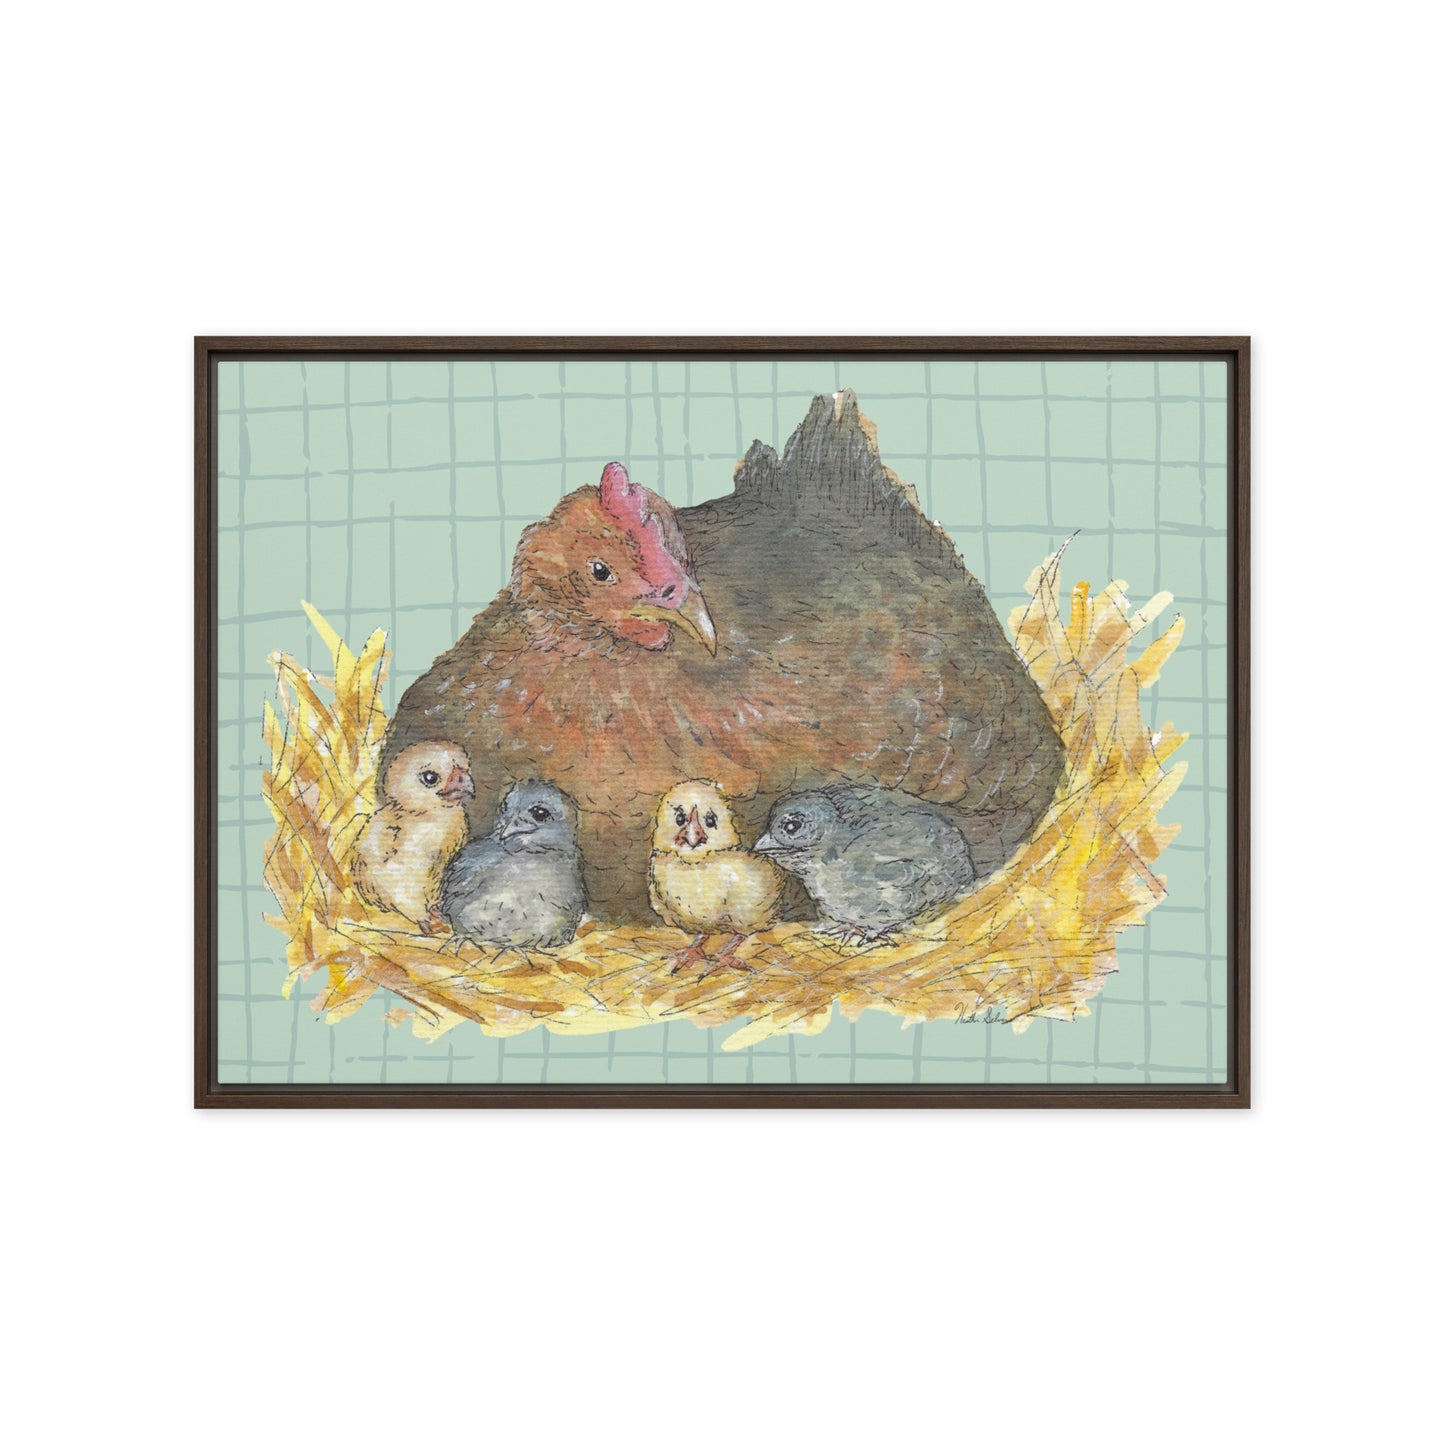 20 by 28 inch Mother Hen Floating Frame Canvas Wall Art. Heather Silver's watercolor painting, Mother Hen, with a green crosshatched background, printed on a stretched canvas and framed with a dark brown pine frame. Hanging hardware included.